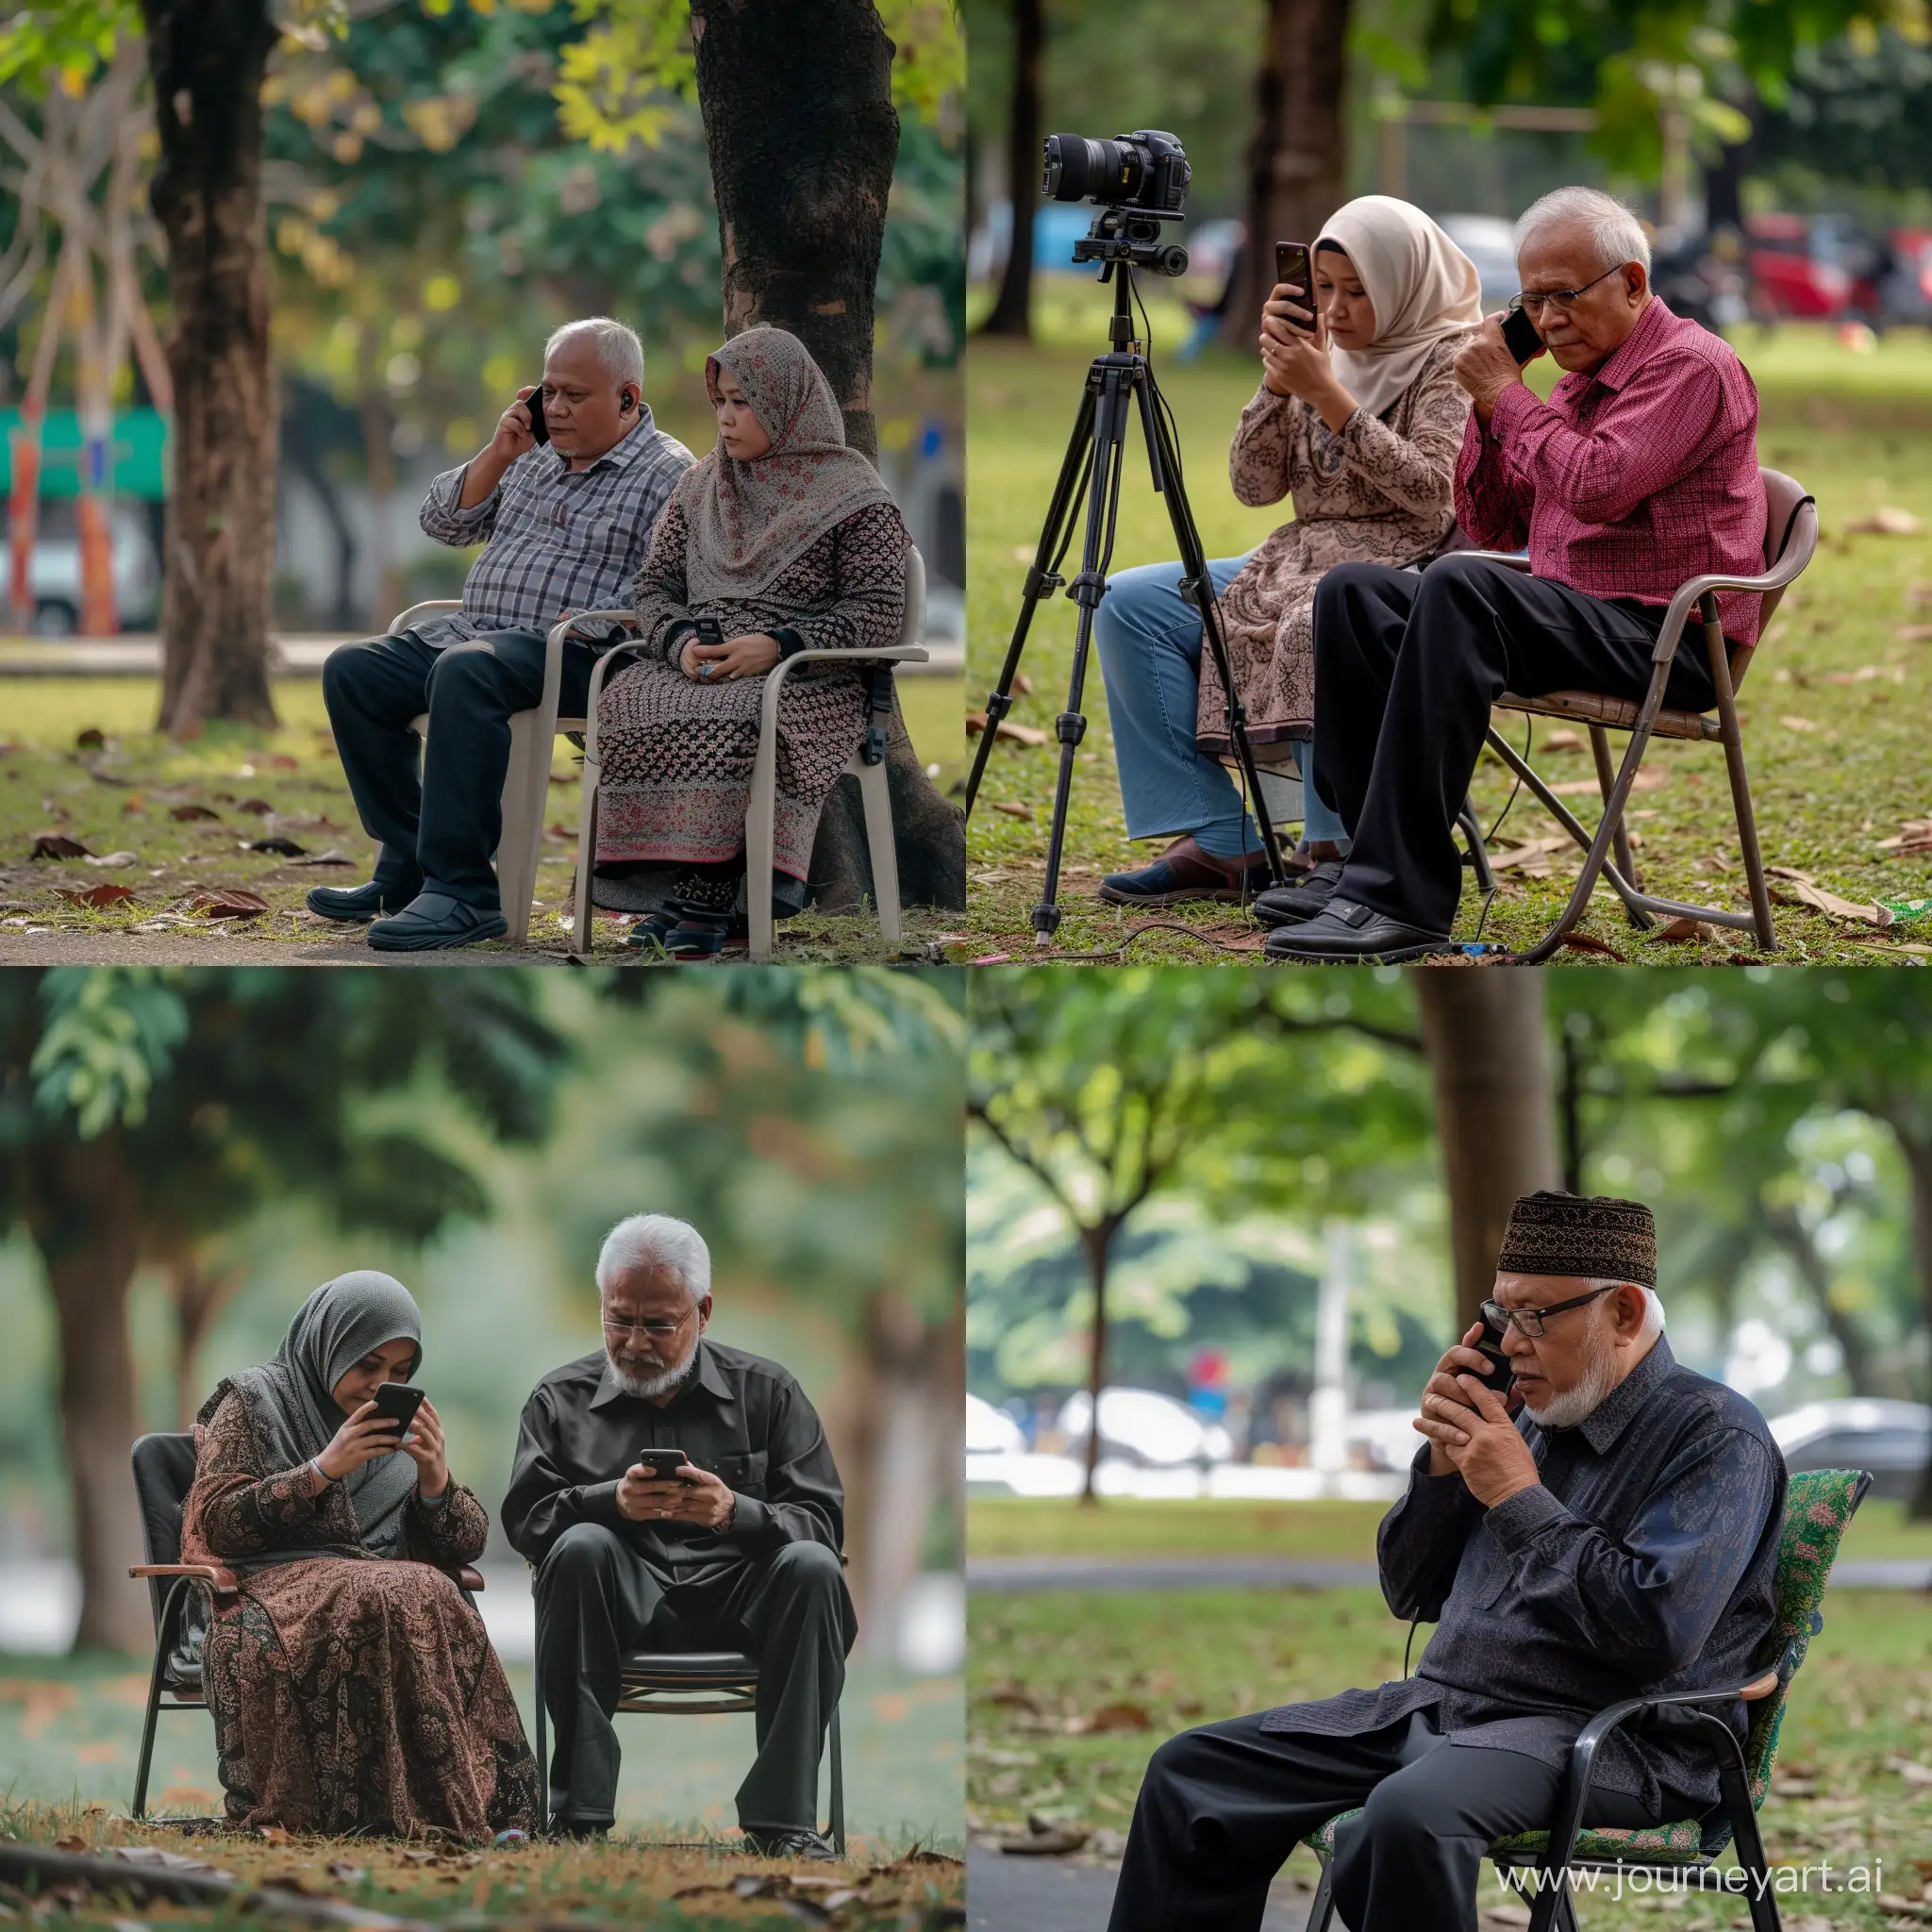 Malay-Man-Enjoying-a-Smartphone-Moment-in-Tranquil-Park-Setting